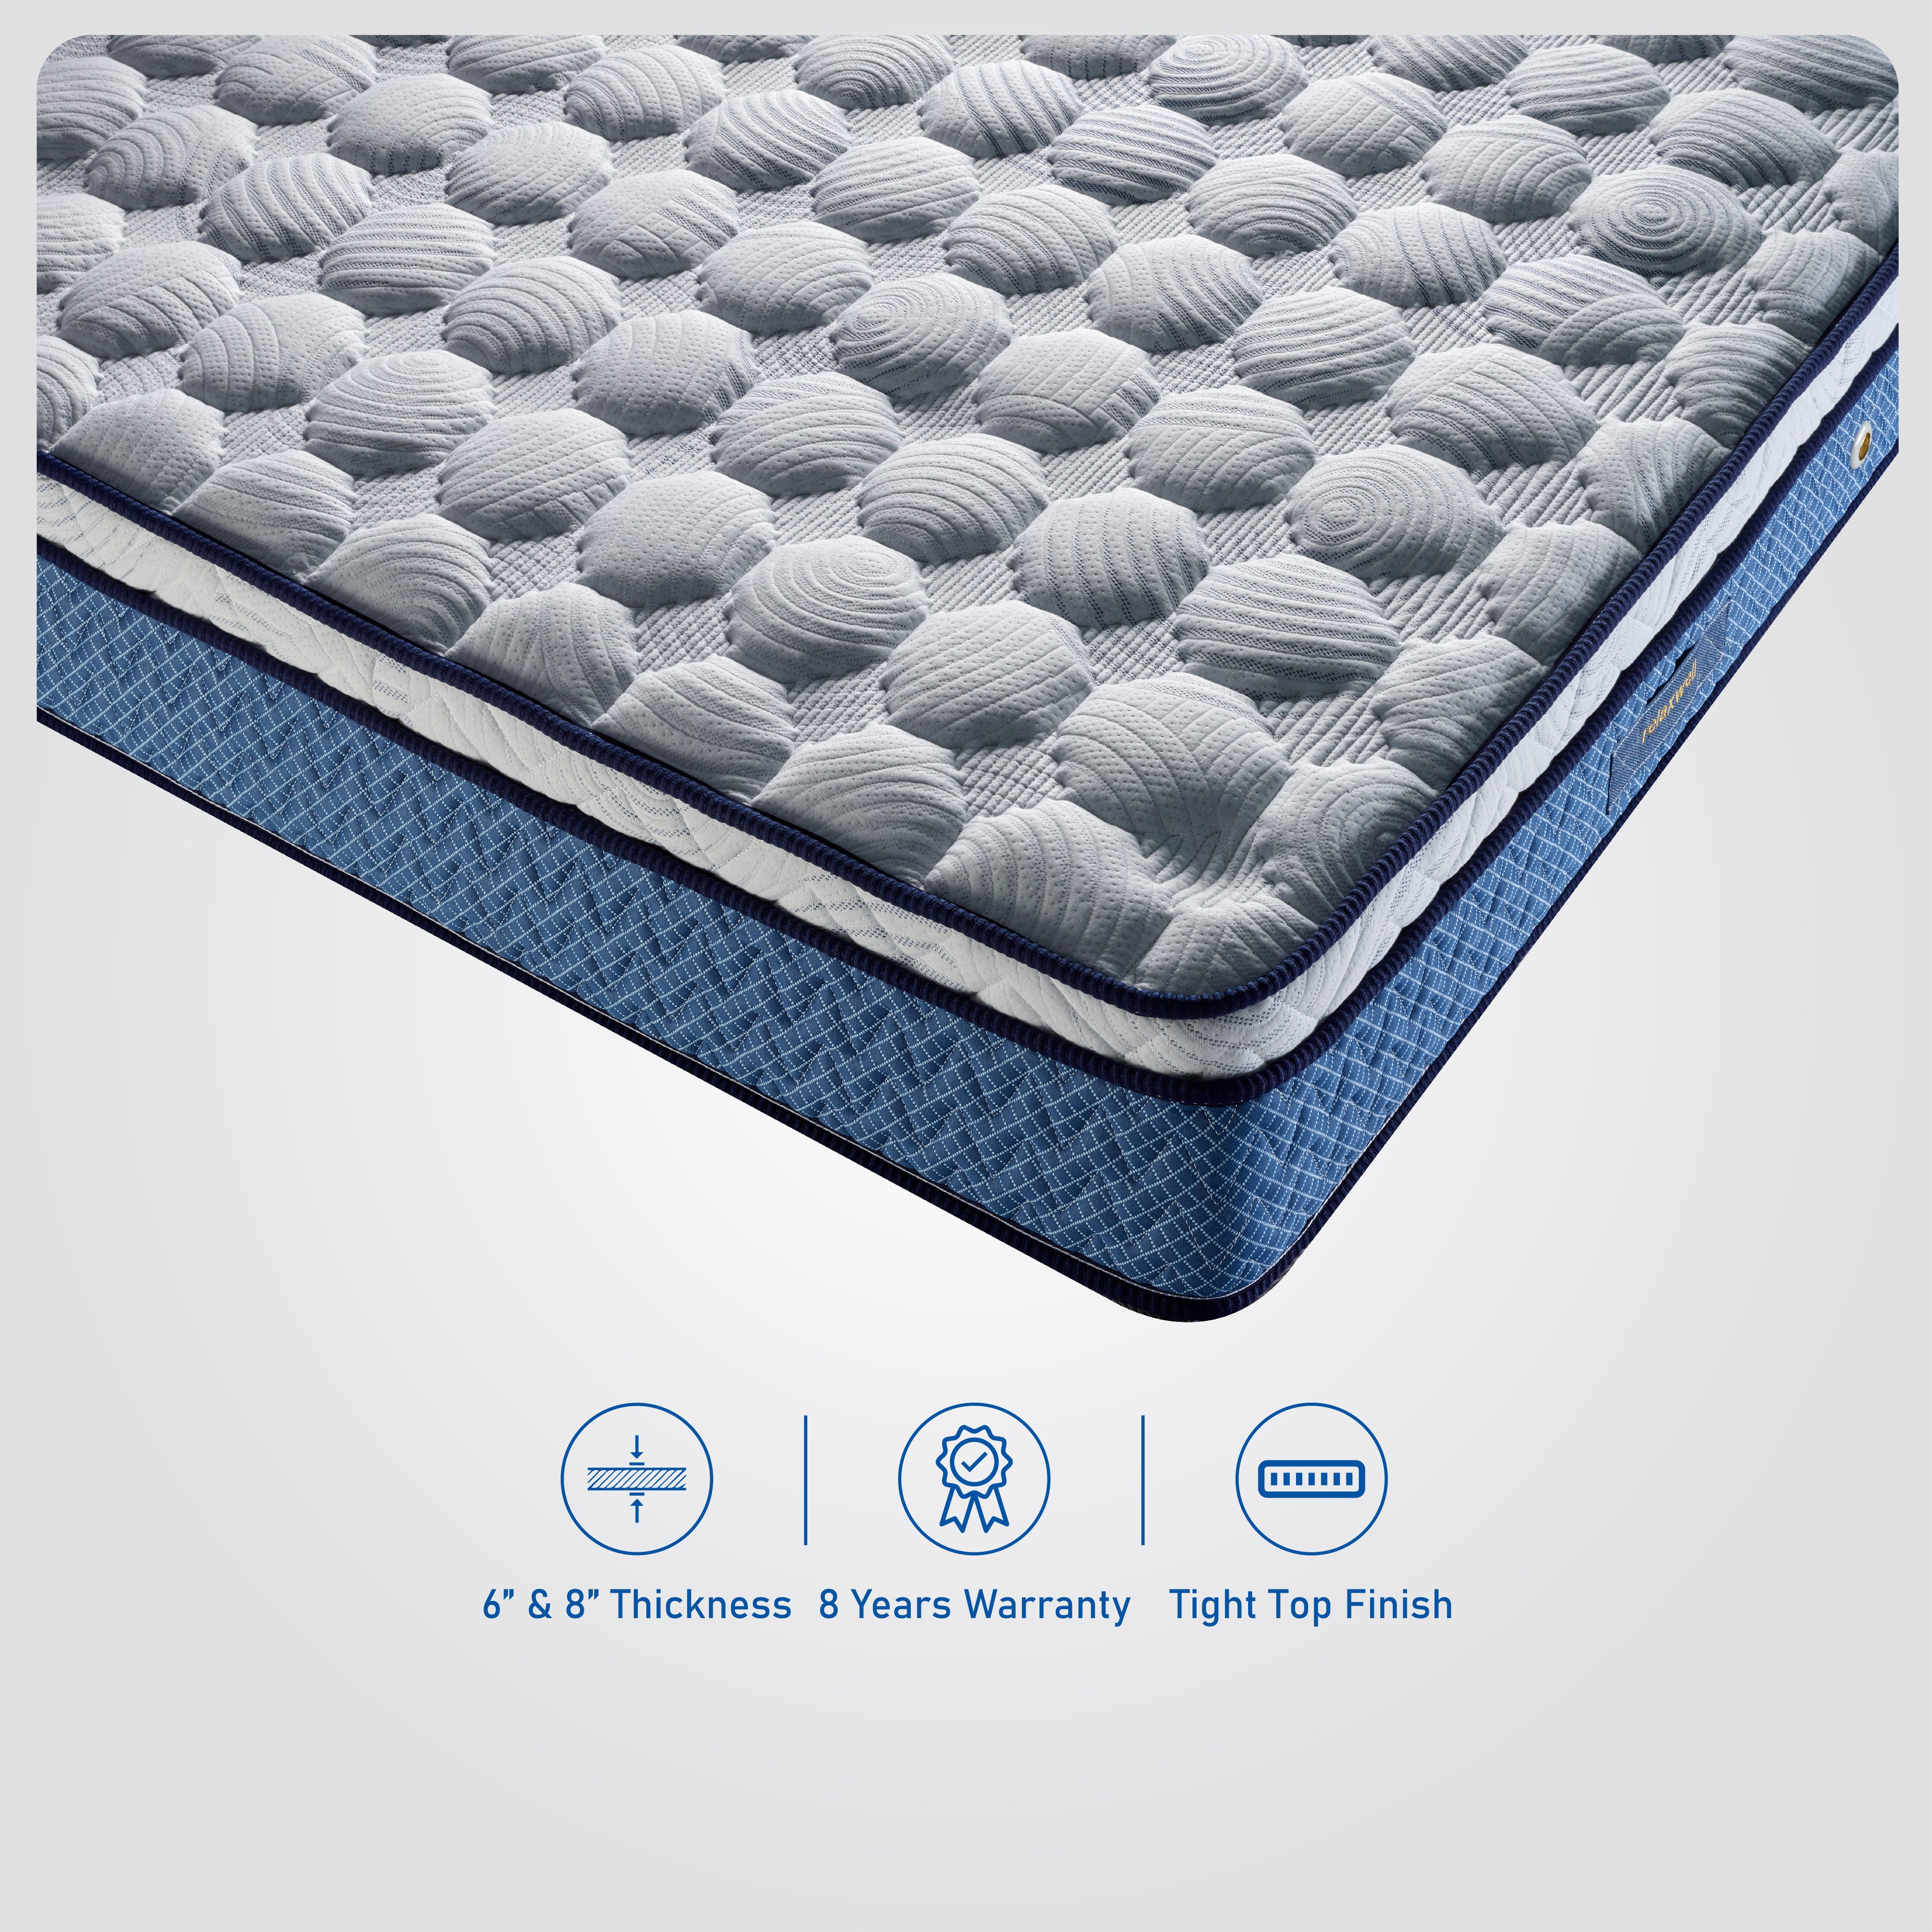 Best Bonnel Spring And Memory Foam Mattress In India